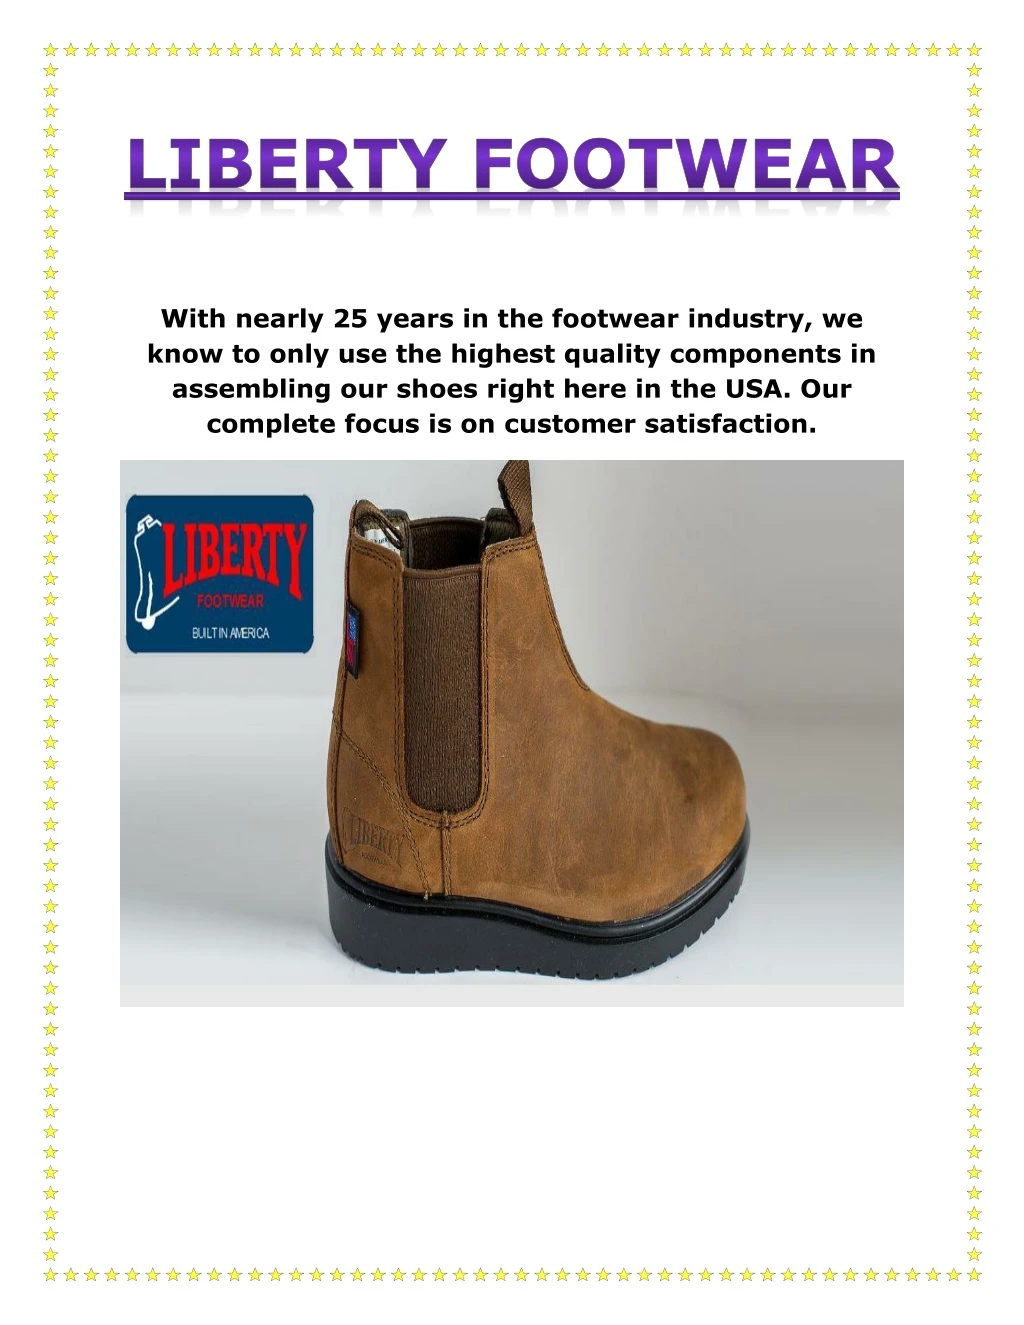 with nearly 25 years in the footwear industry